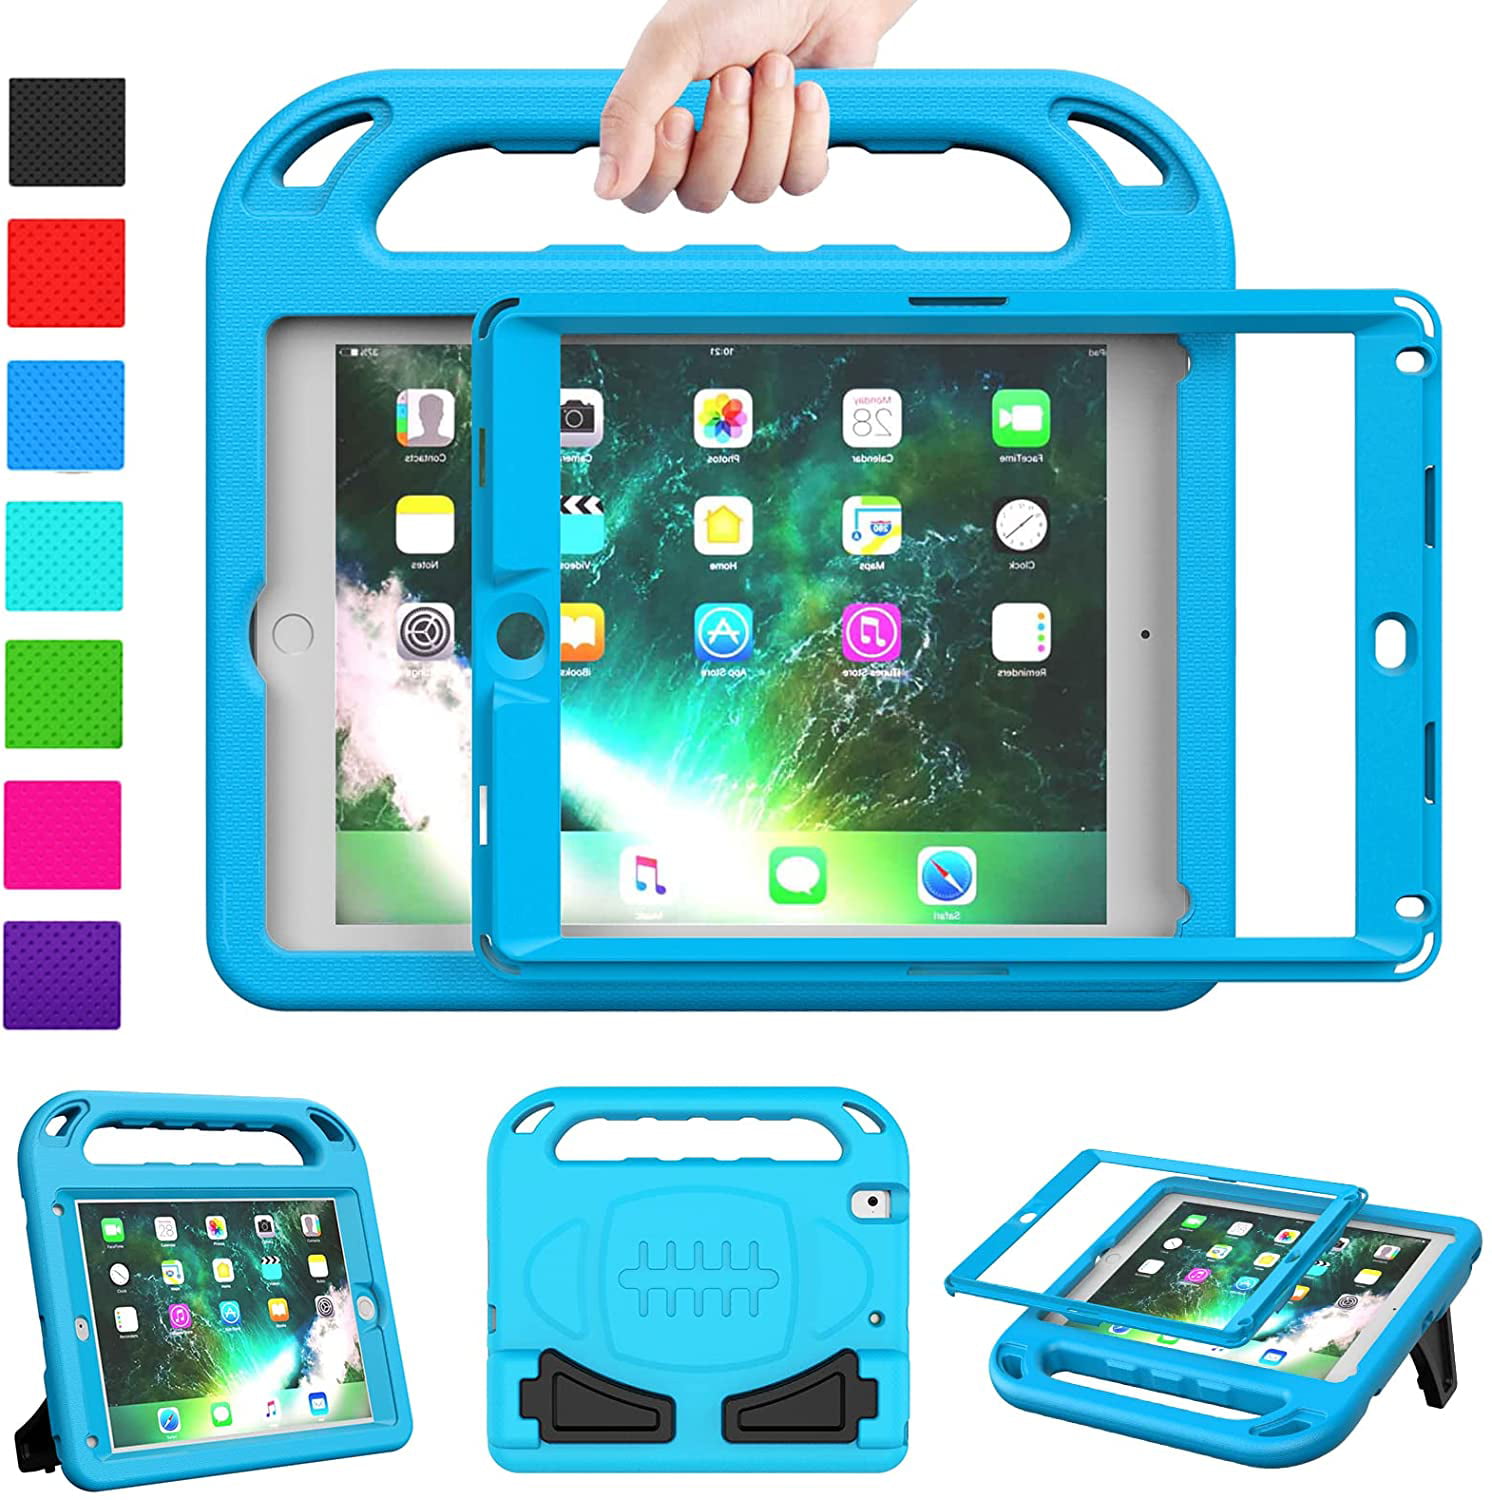 HDE Case for iPad Air Kids Protective Shock Proof Bumper Cover with Handle Stand for Apple iPad Air 1-2013 Release 1st Generation Green